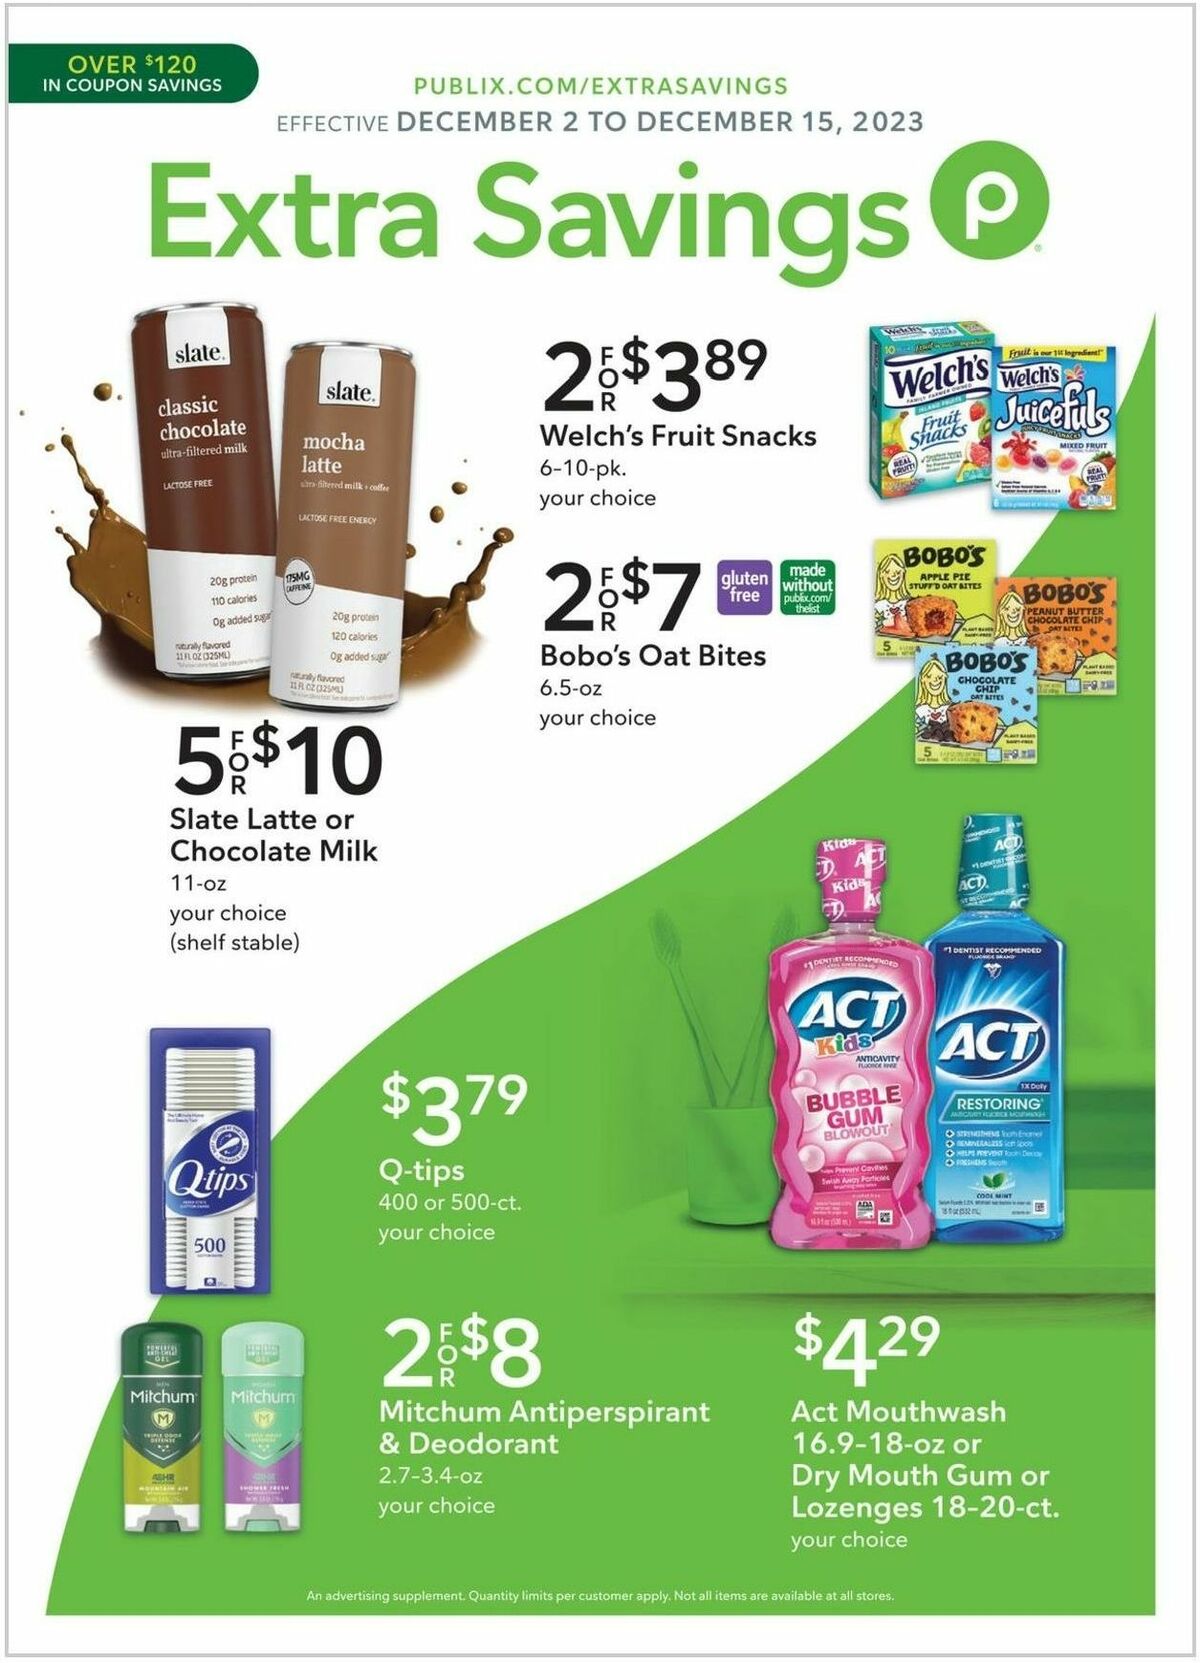 Publix Extra Savings Weekly Ad from December 2